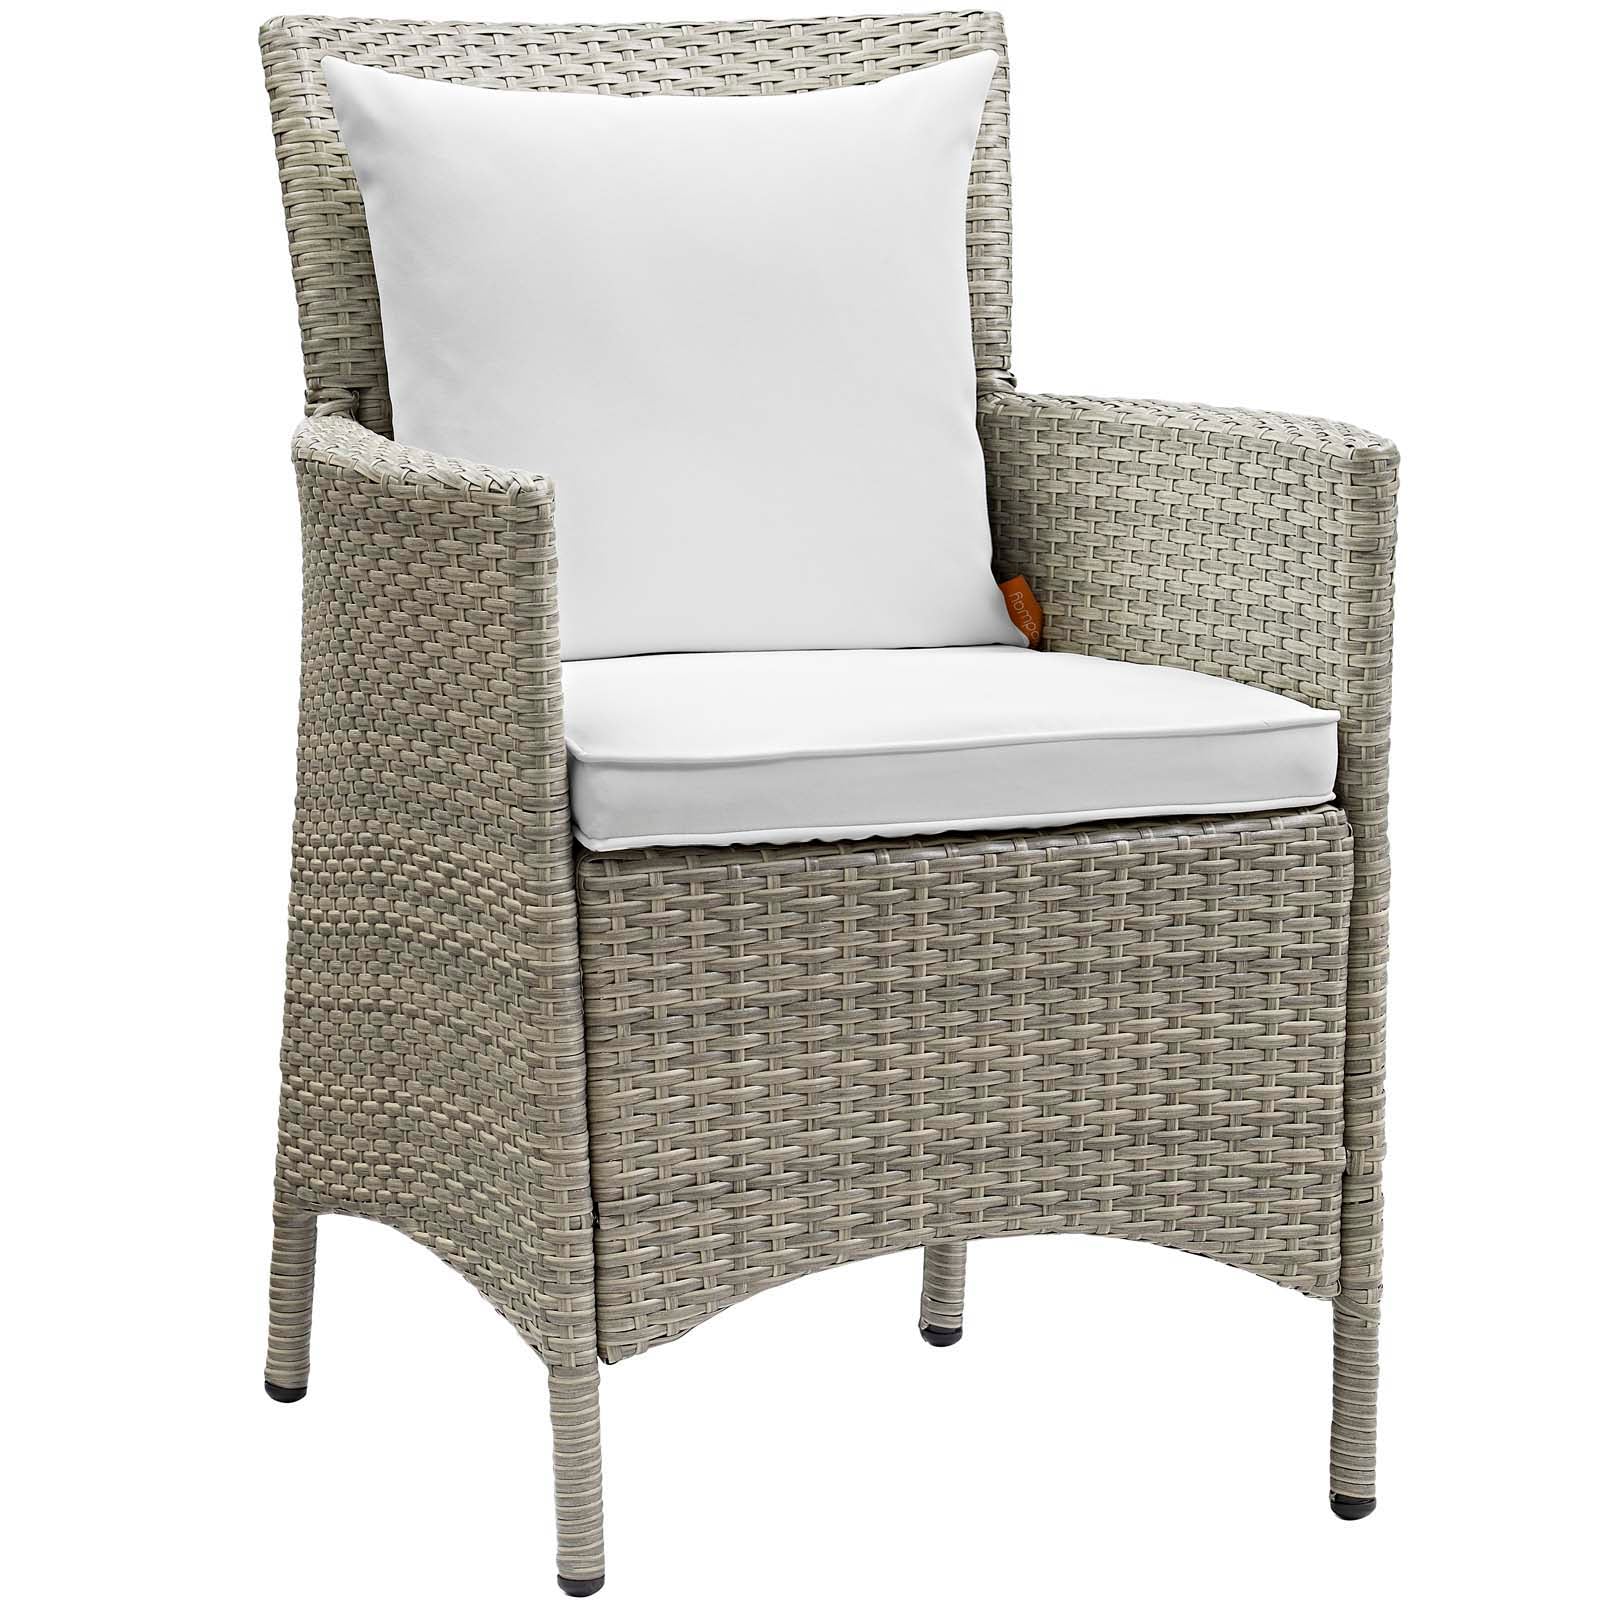 Modway Outdoor Dining Chairs - Conduit Outdoor Patio Wicker Rattan Dining Armchair Set of 2 Light Gray White